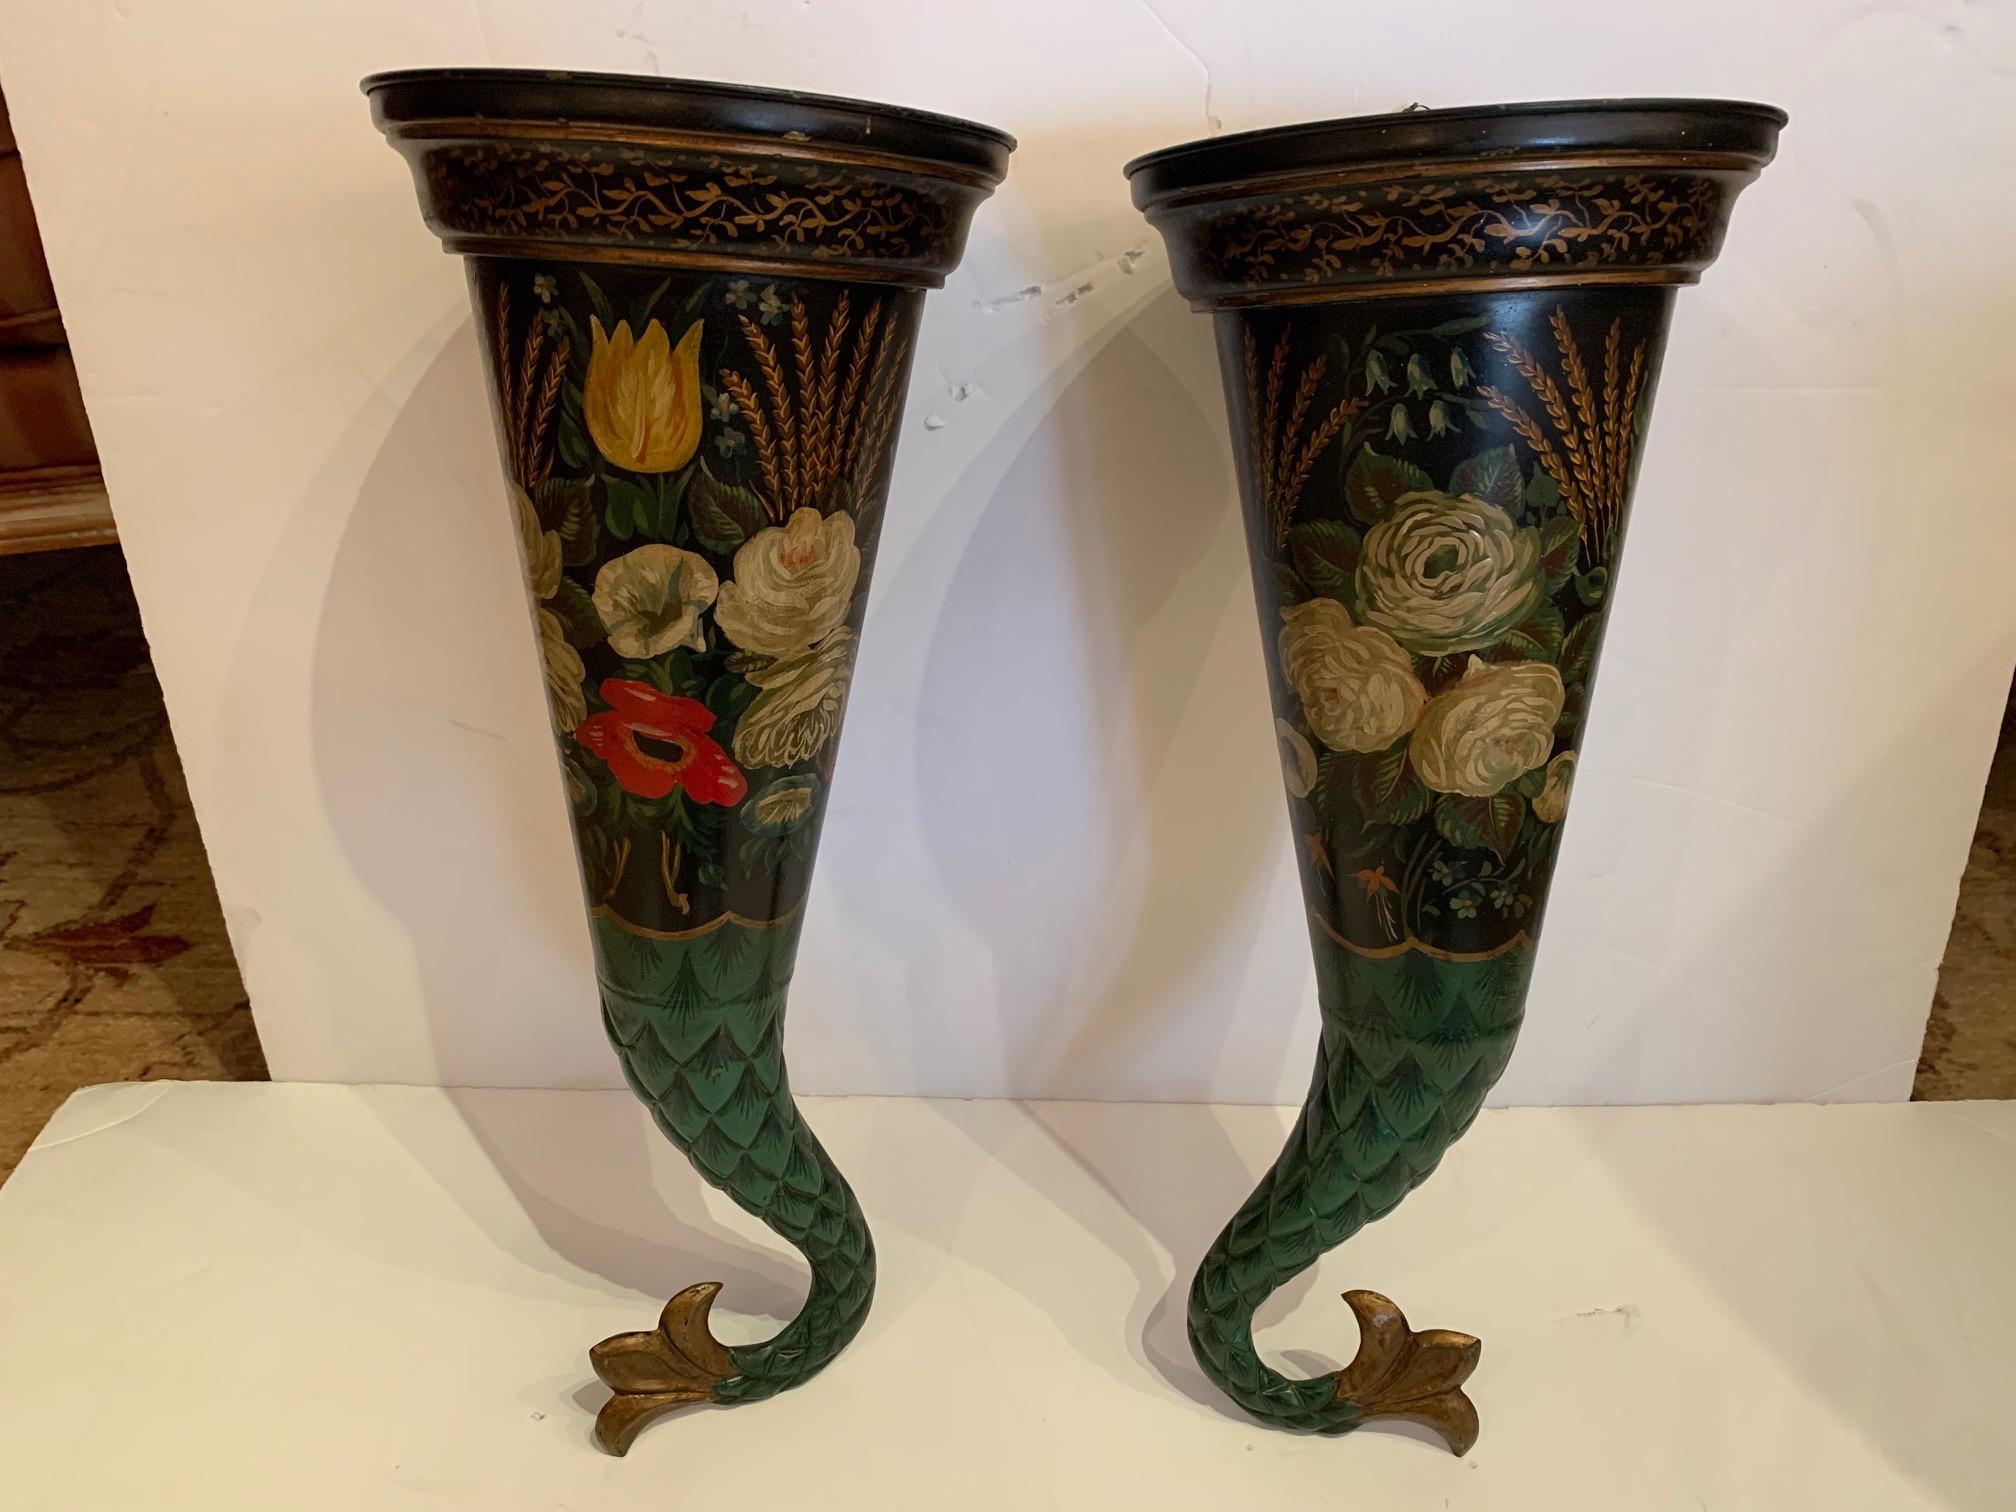 A delightful horn shaped pair of decorative tole wall pockets having black background and hand painted floral design.